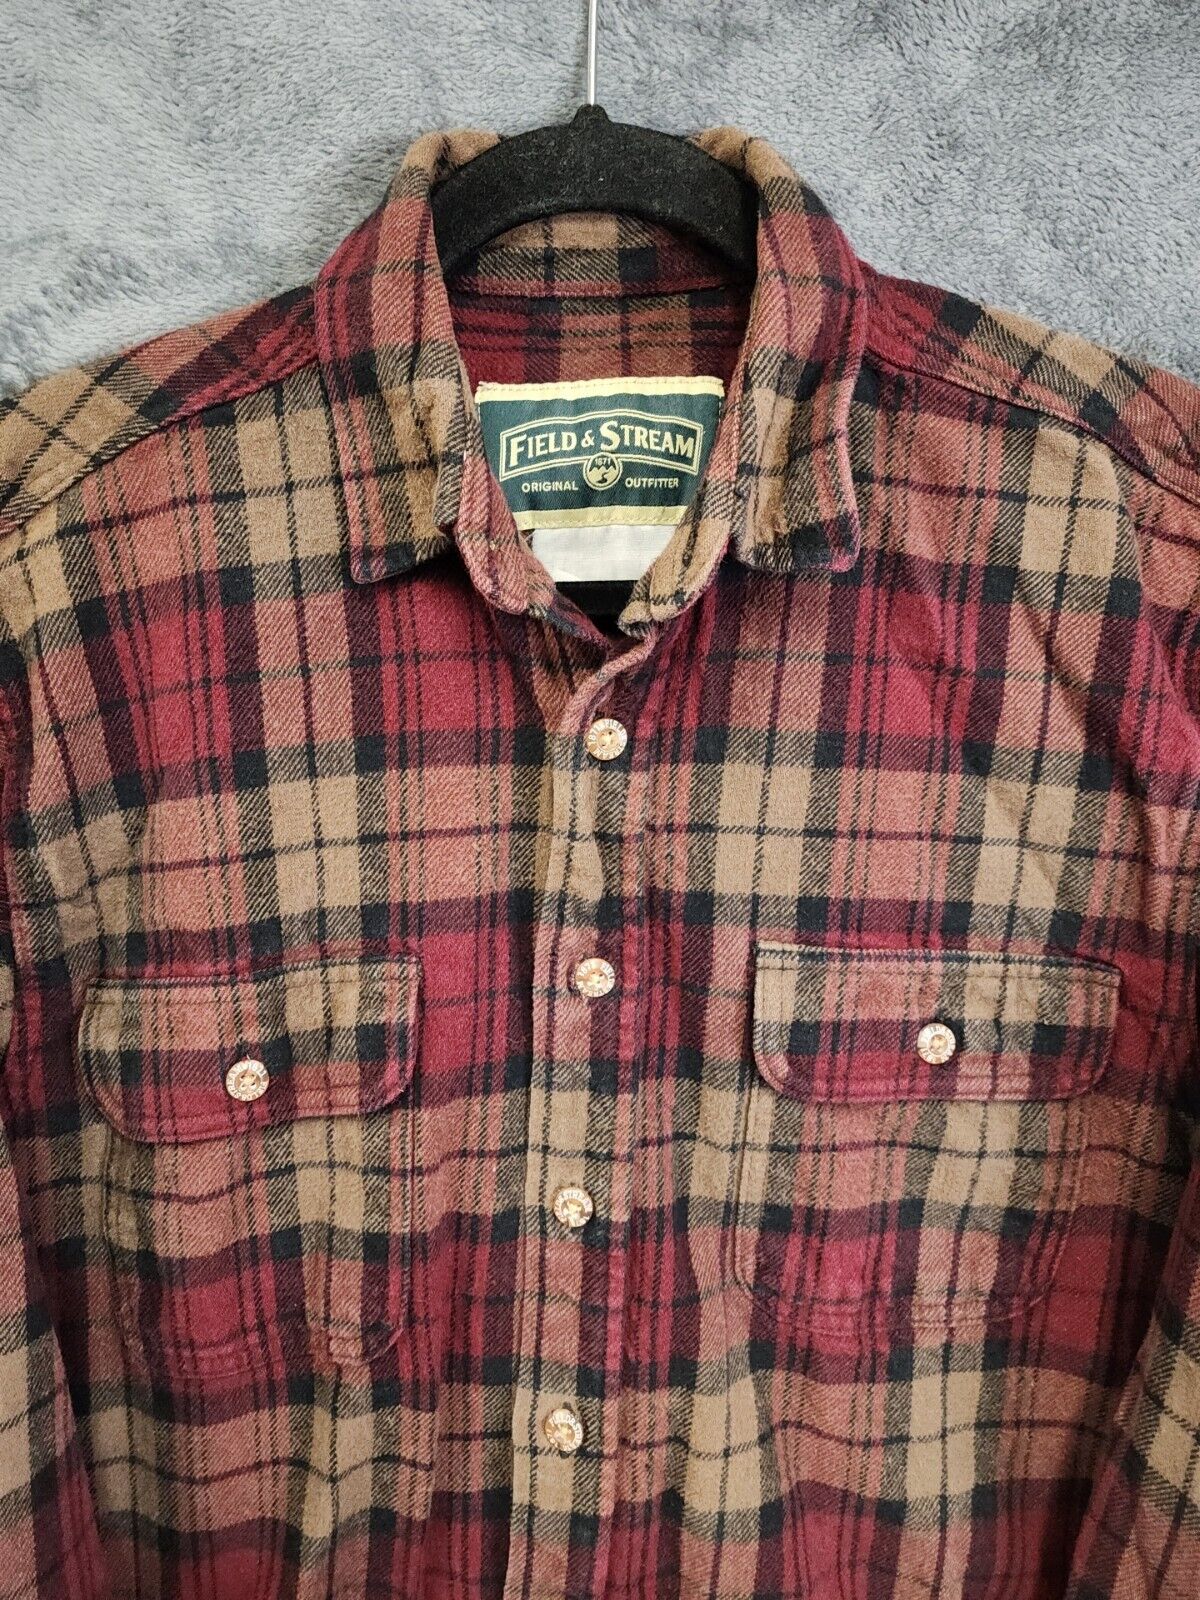 Field & Stream Original Outfitter Men's Large Checkered Button Down ...